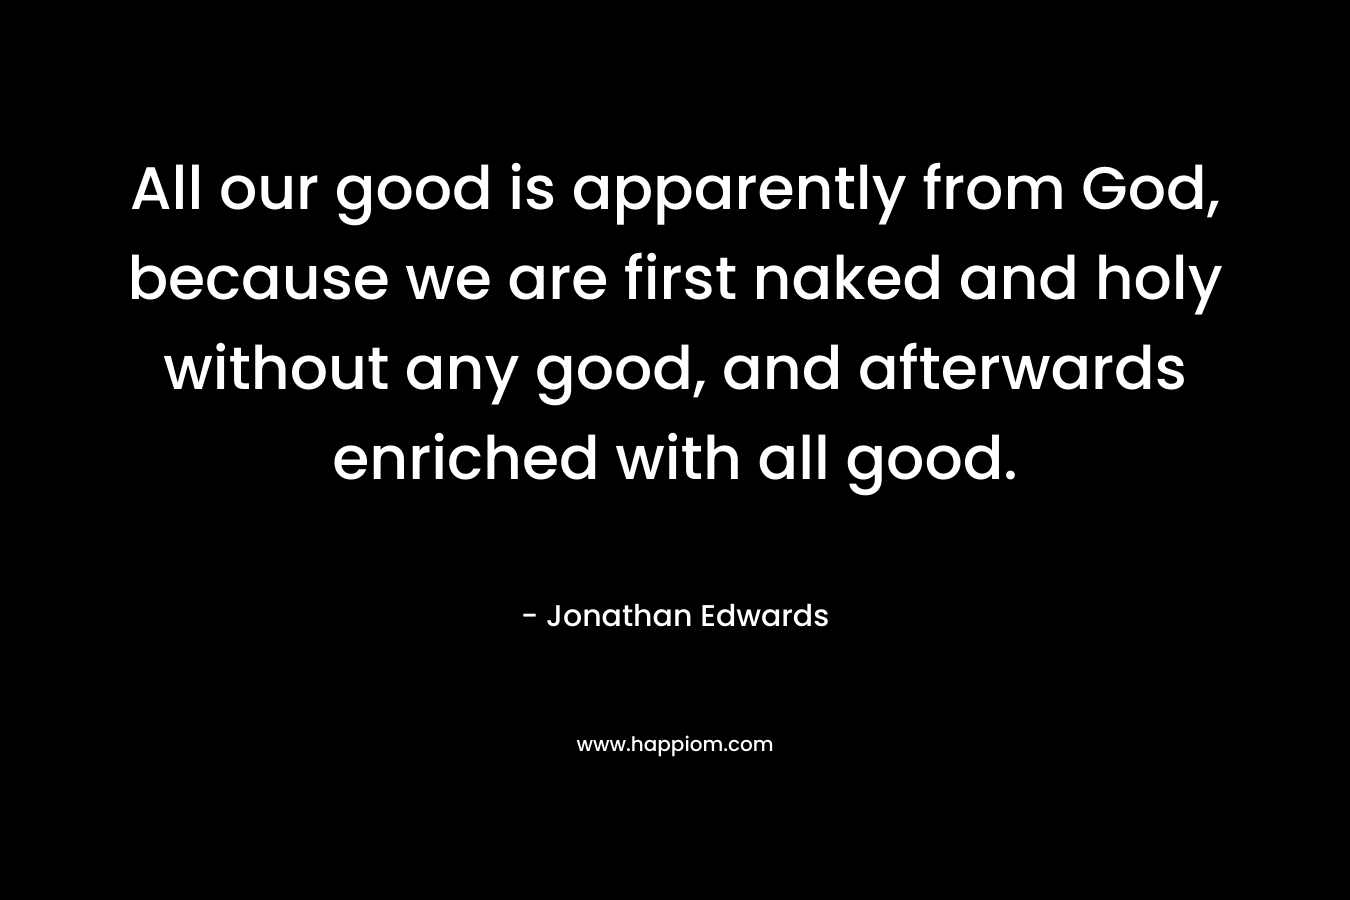 All our good is apparently from God, because we are first naked and holy without any good, and afterwards enriched with all good. – Jonathan Edwards